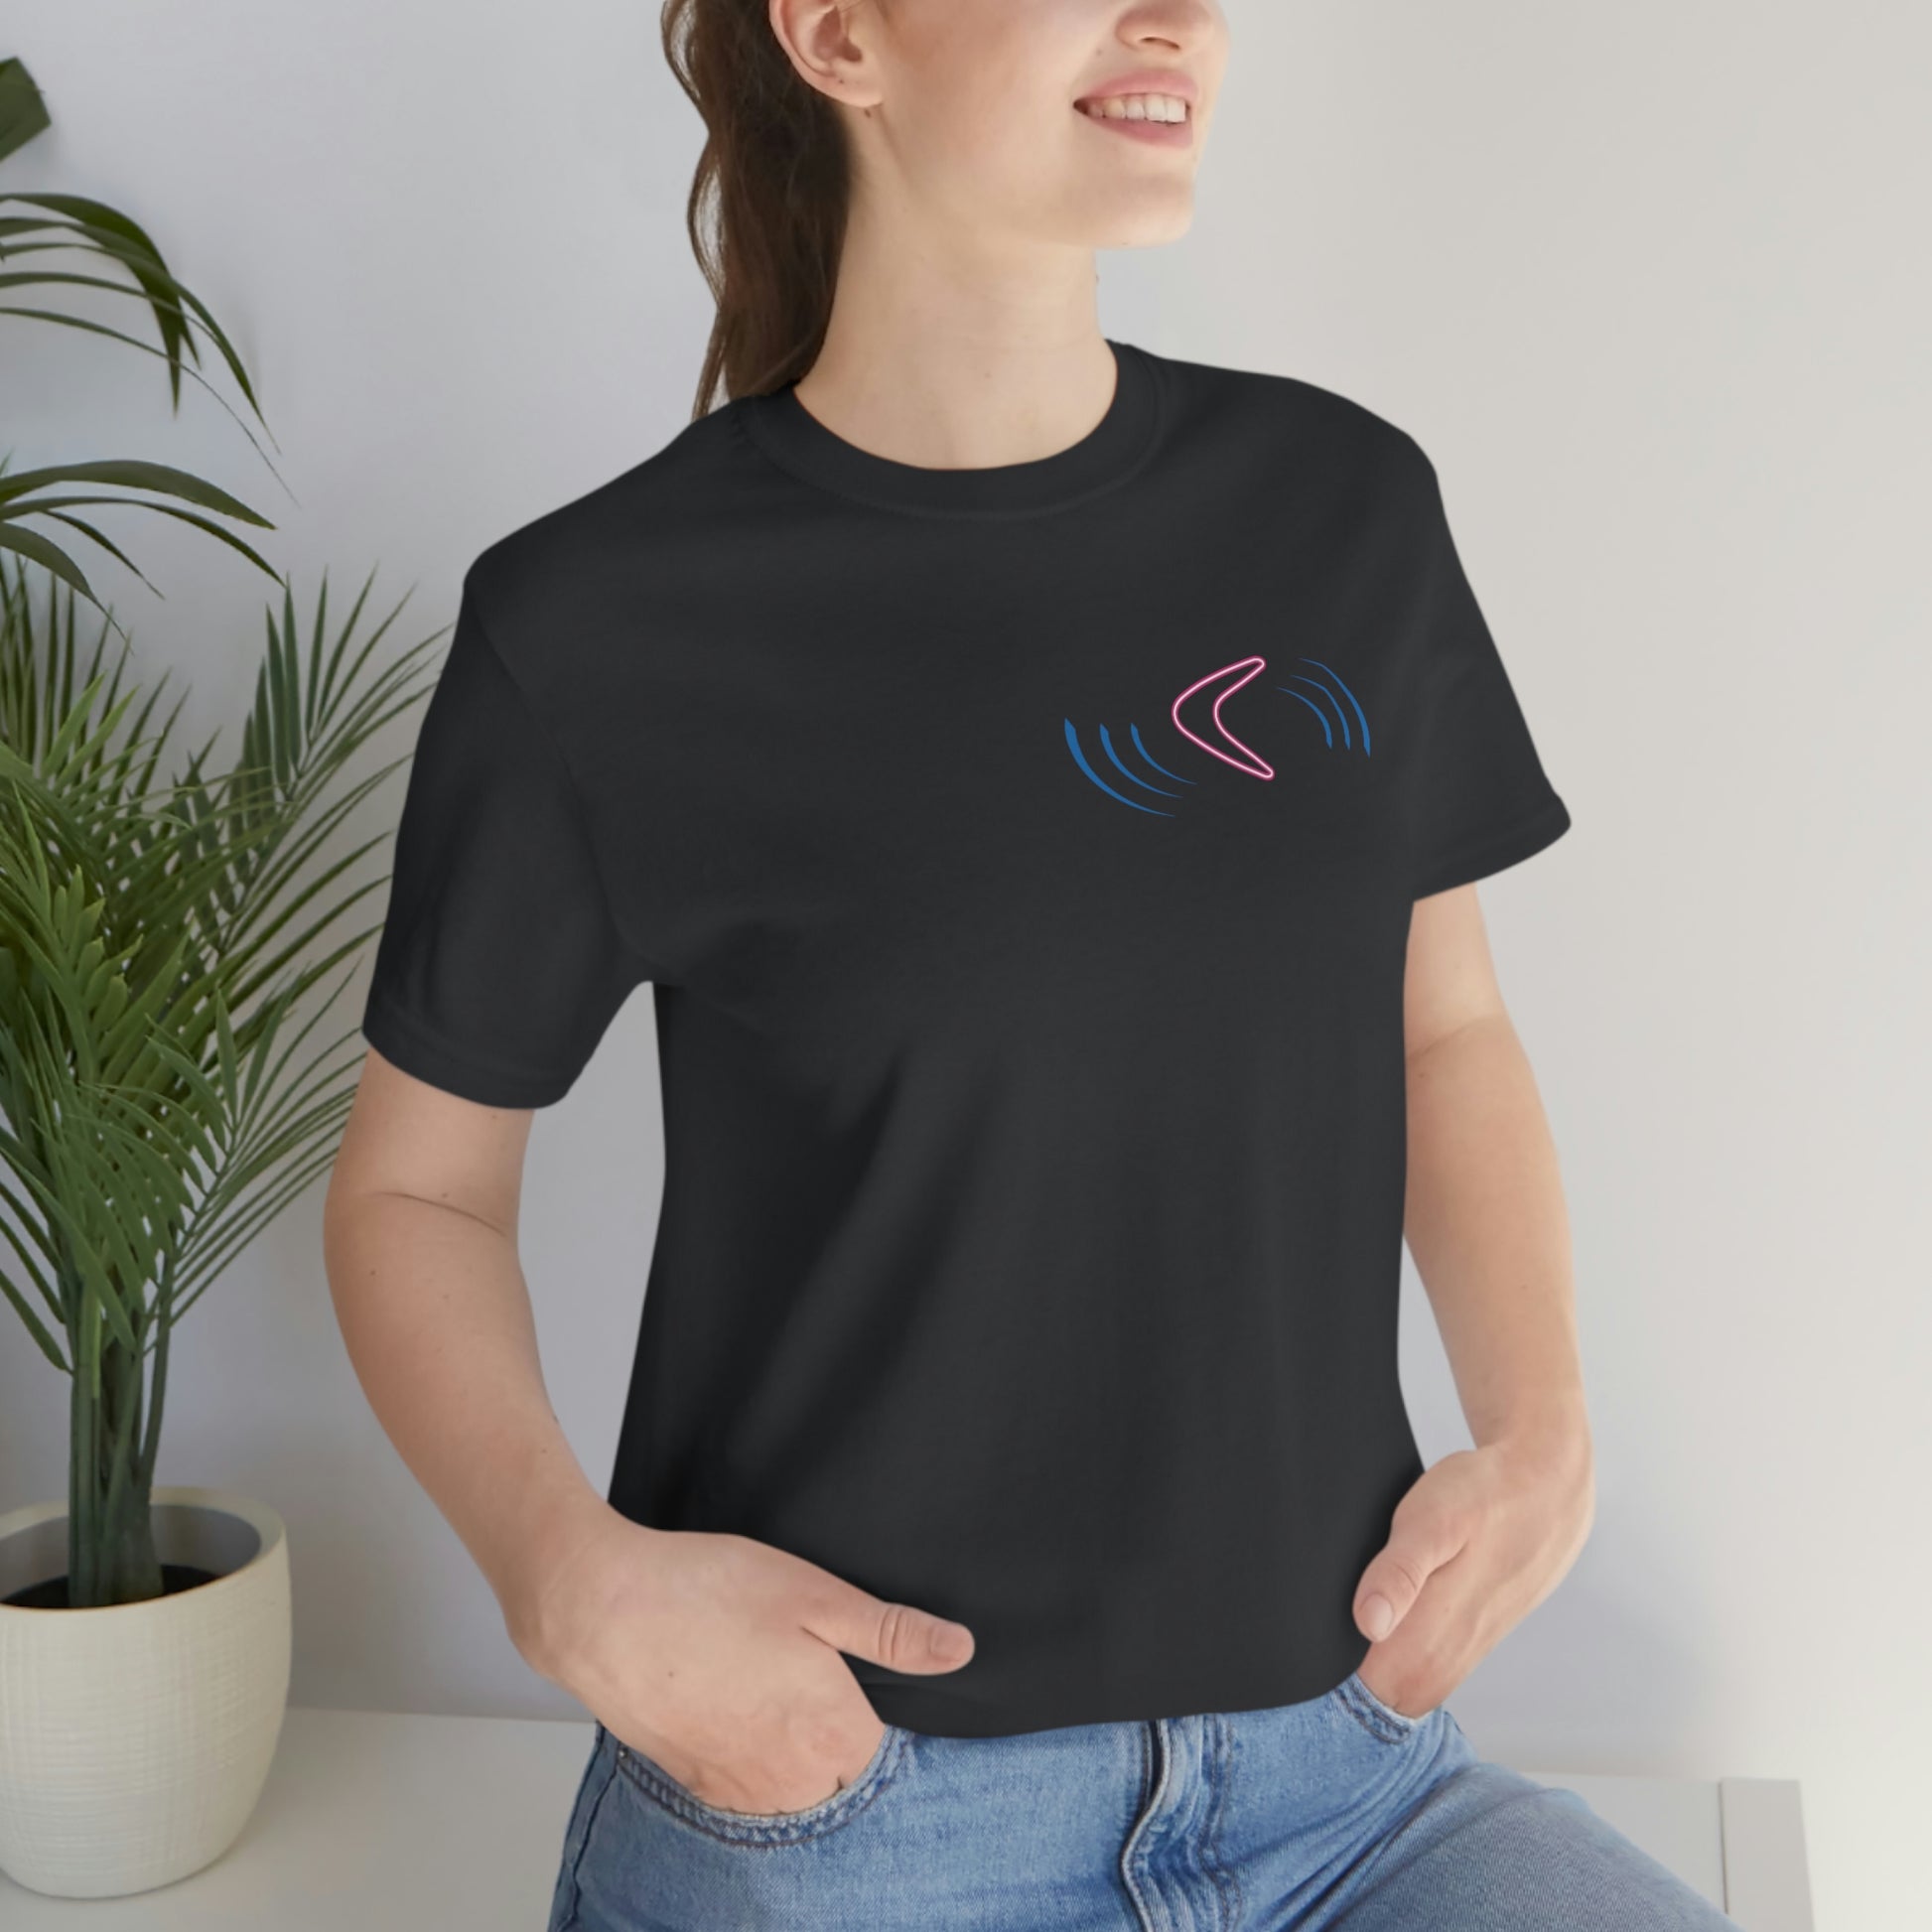 FLYING BOOMERANG  - Dark Grey T-Shirt with vibrant, dynamic flying boomerang design. Taken from the TEQNEON Radioactive collection.